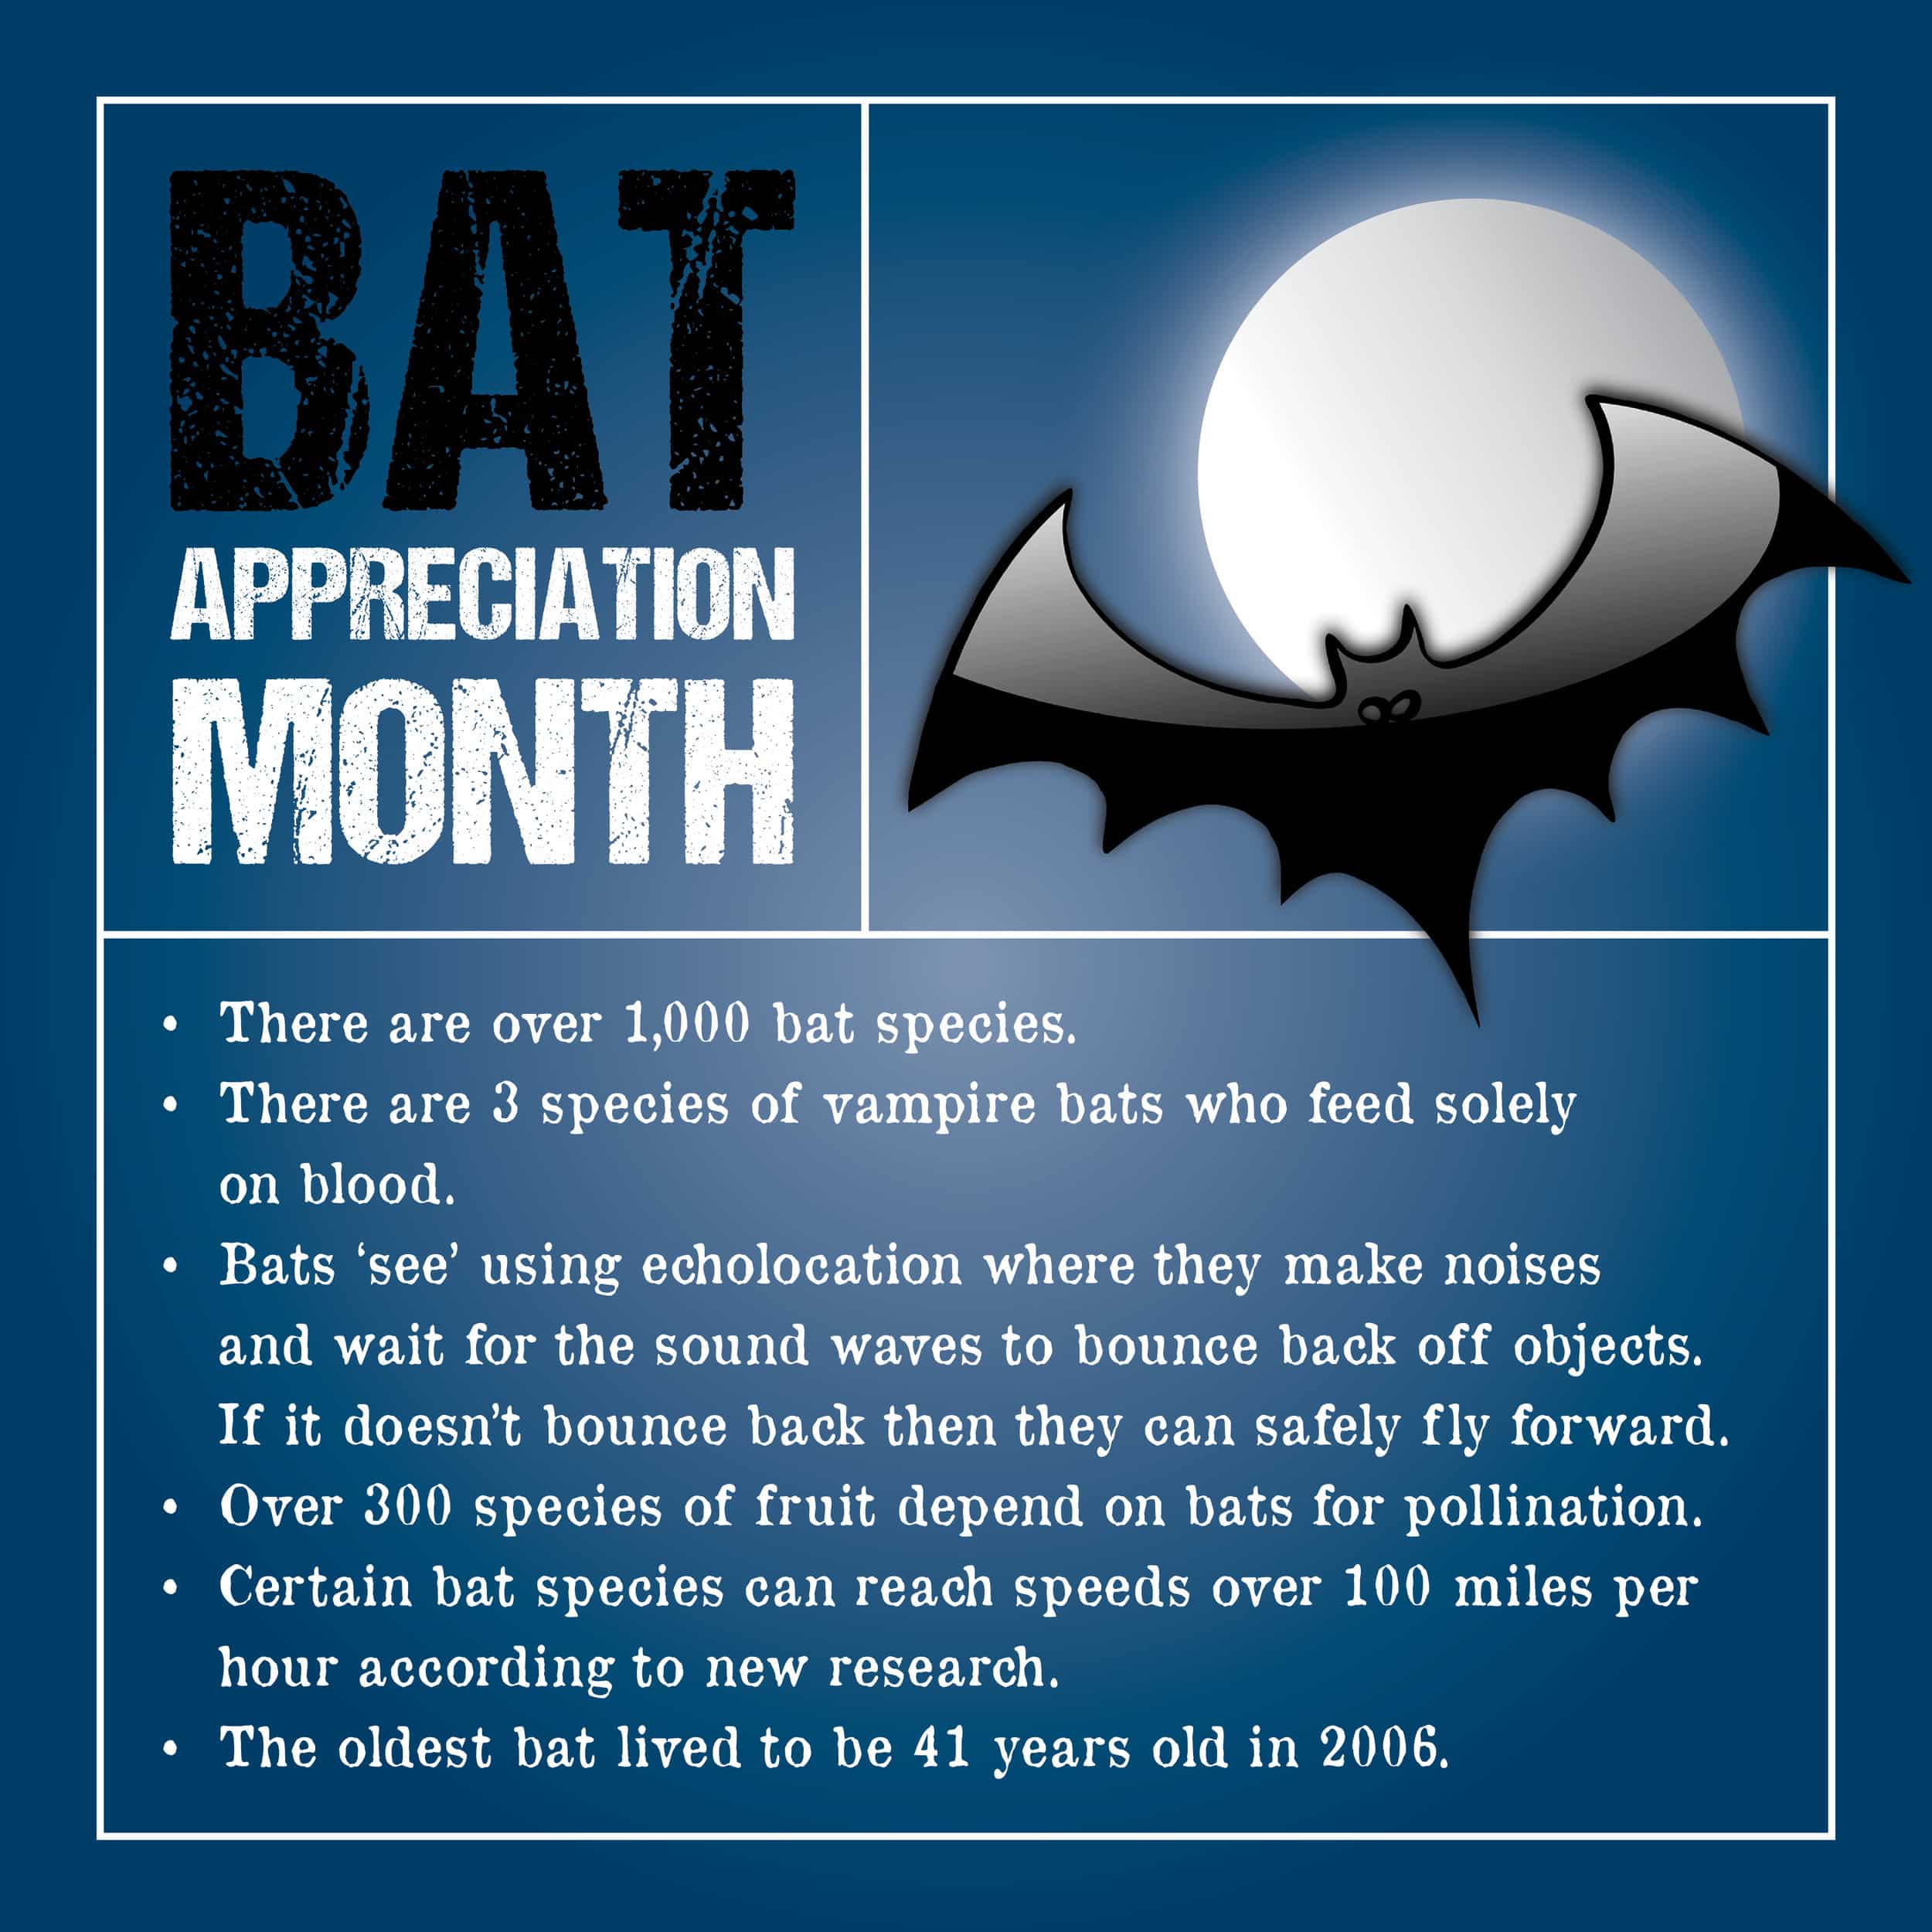 October is Bat Appreciation Month, so here are some fun facts about bats to prepare you for the month. These facts were provided by Science Kids.